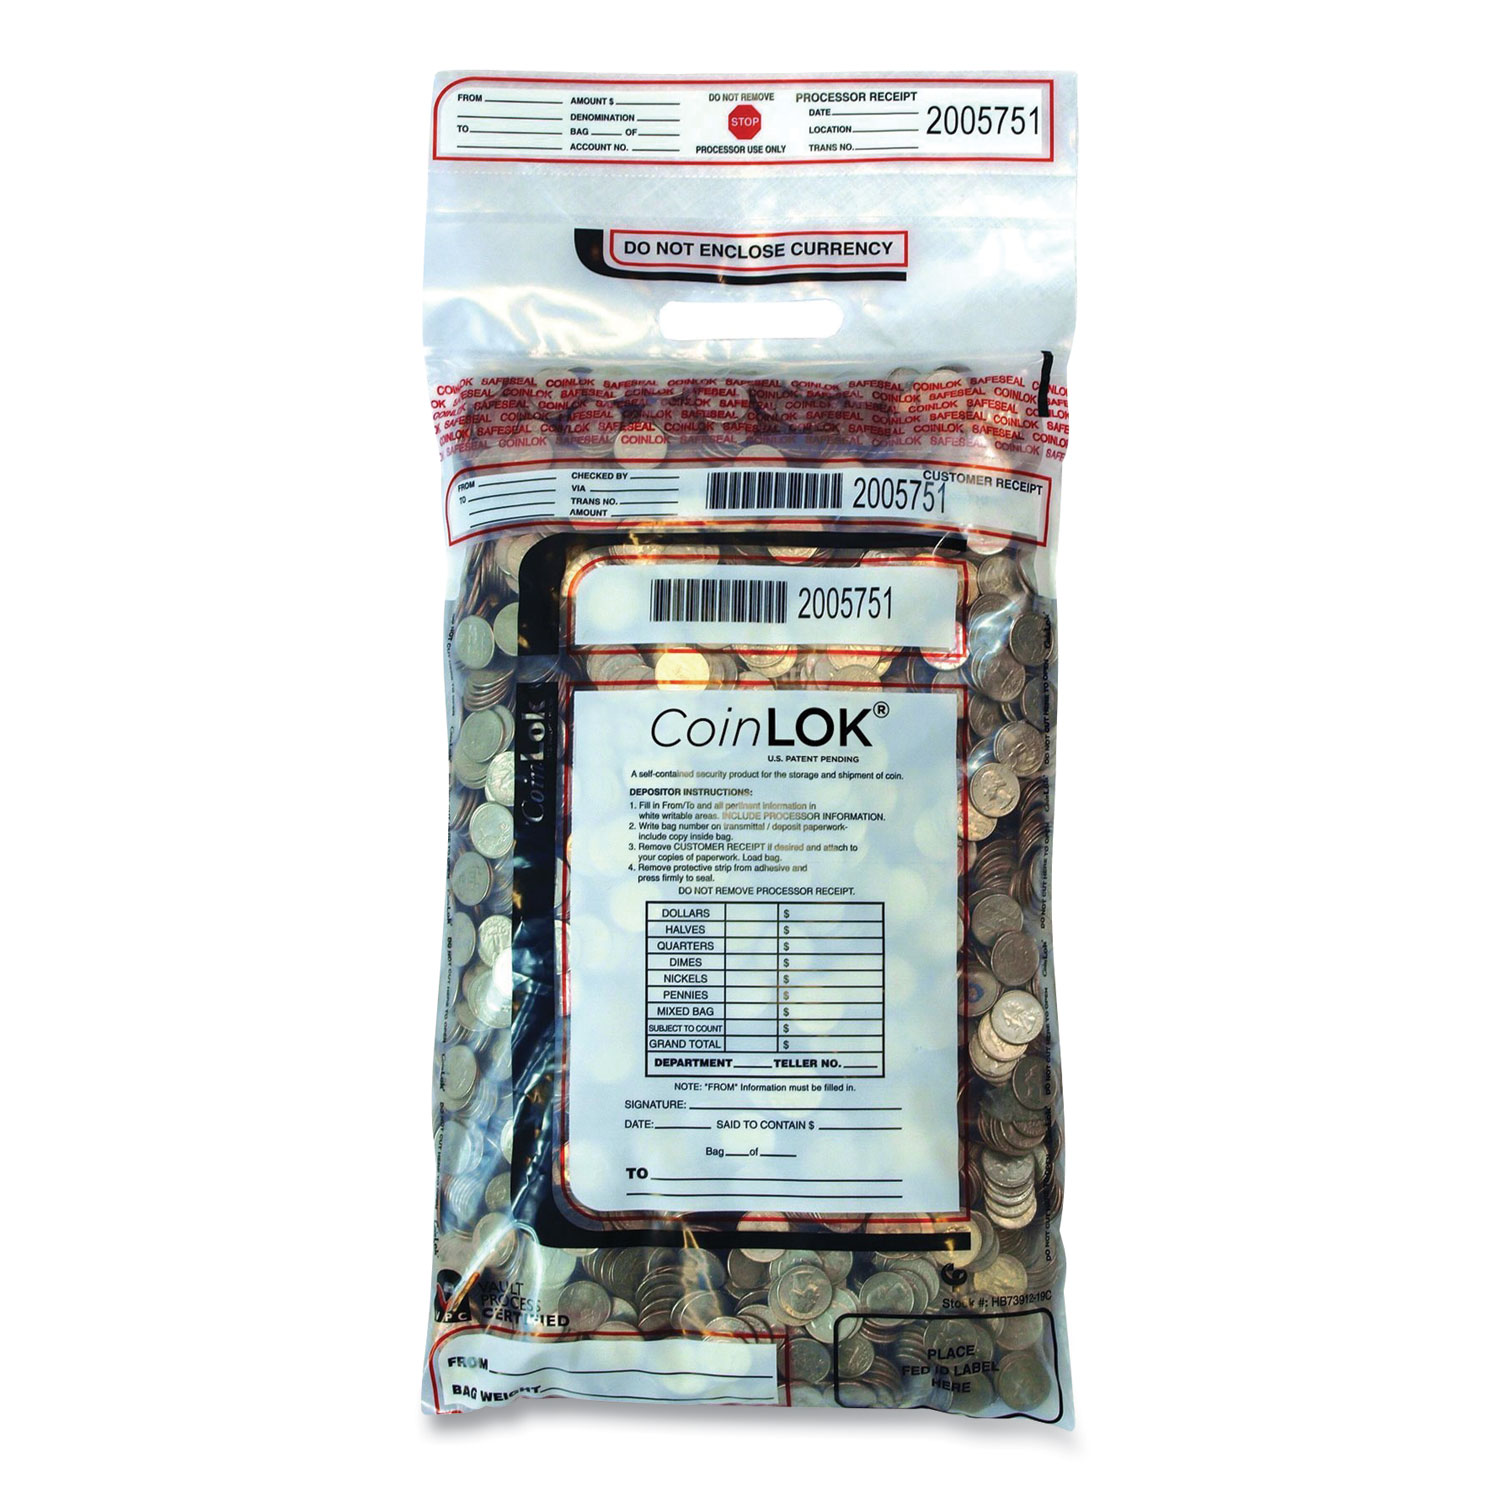  Control Papers 585100 CoinLOK Tamper-Evident Deposit Bags, 12 x 25, Clear, 50/Pack (CNK502566) 